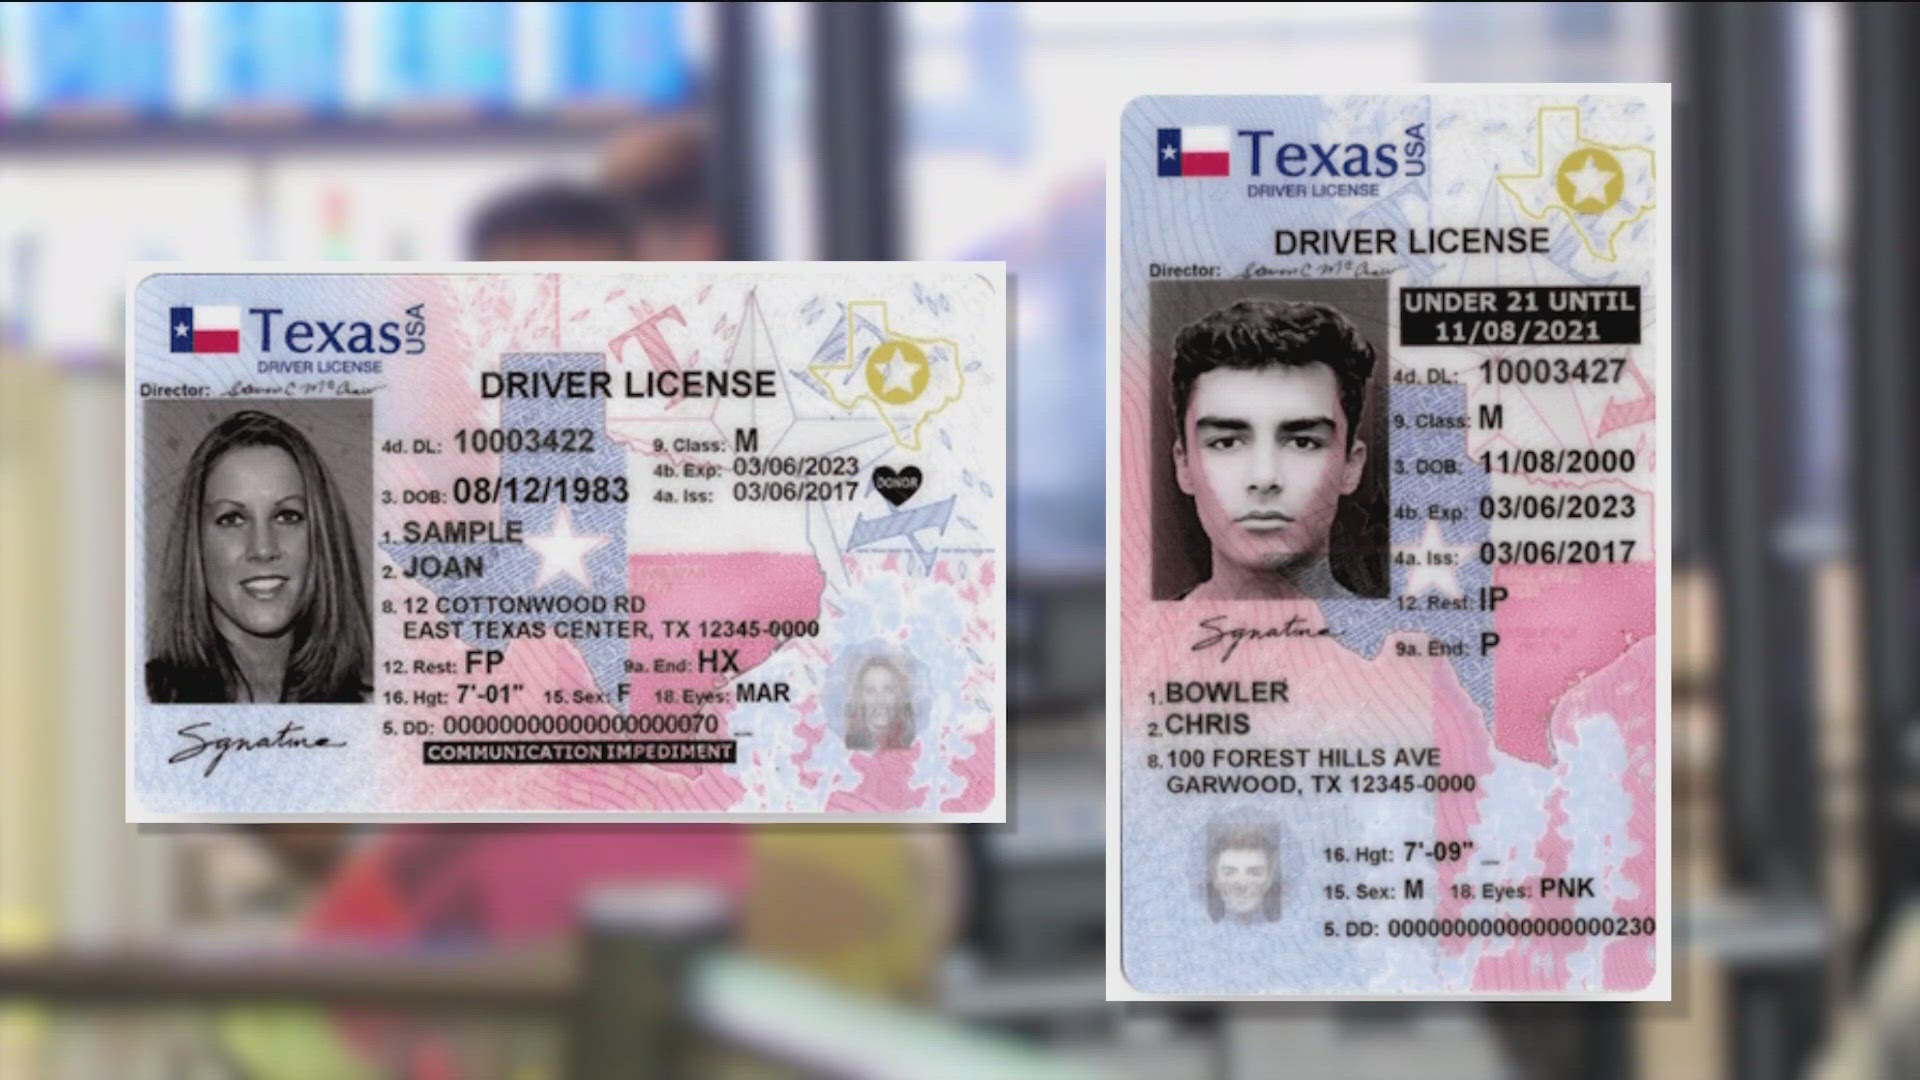 If you don't have a REAL ID starting on May 7, 2025, the TSA won't let you through security checkpoints at any commercial airport in the U.S.